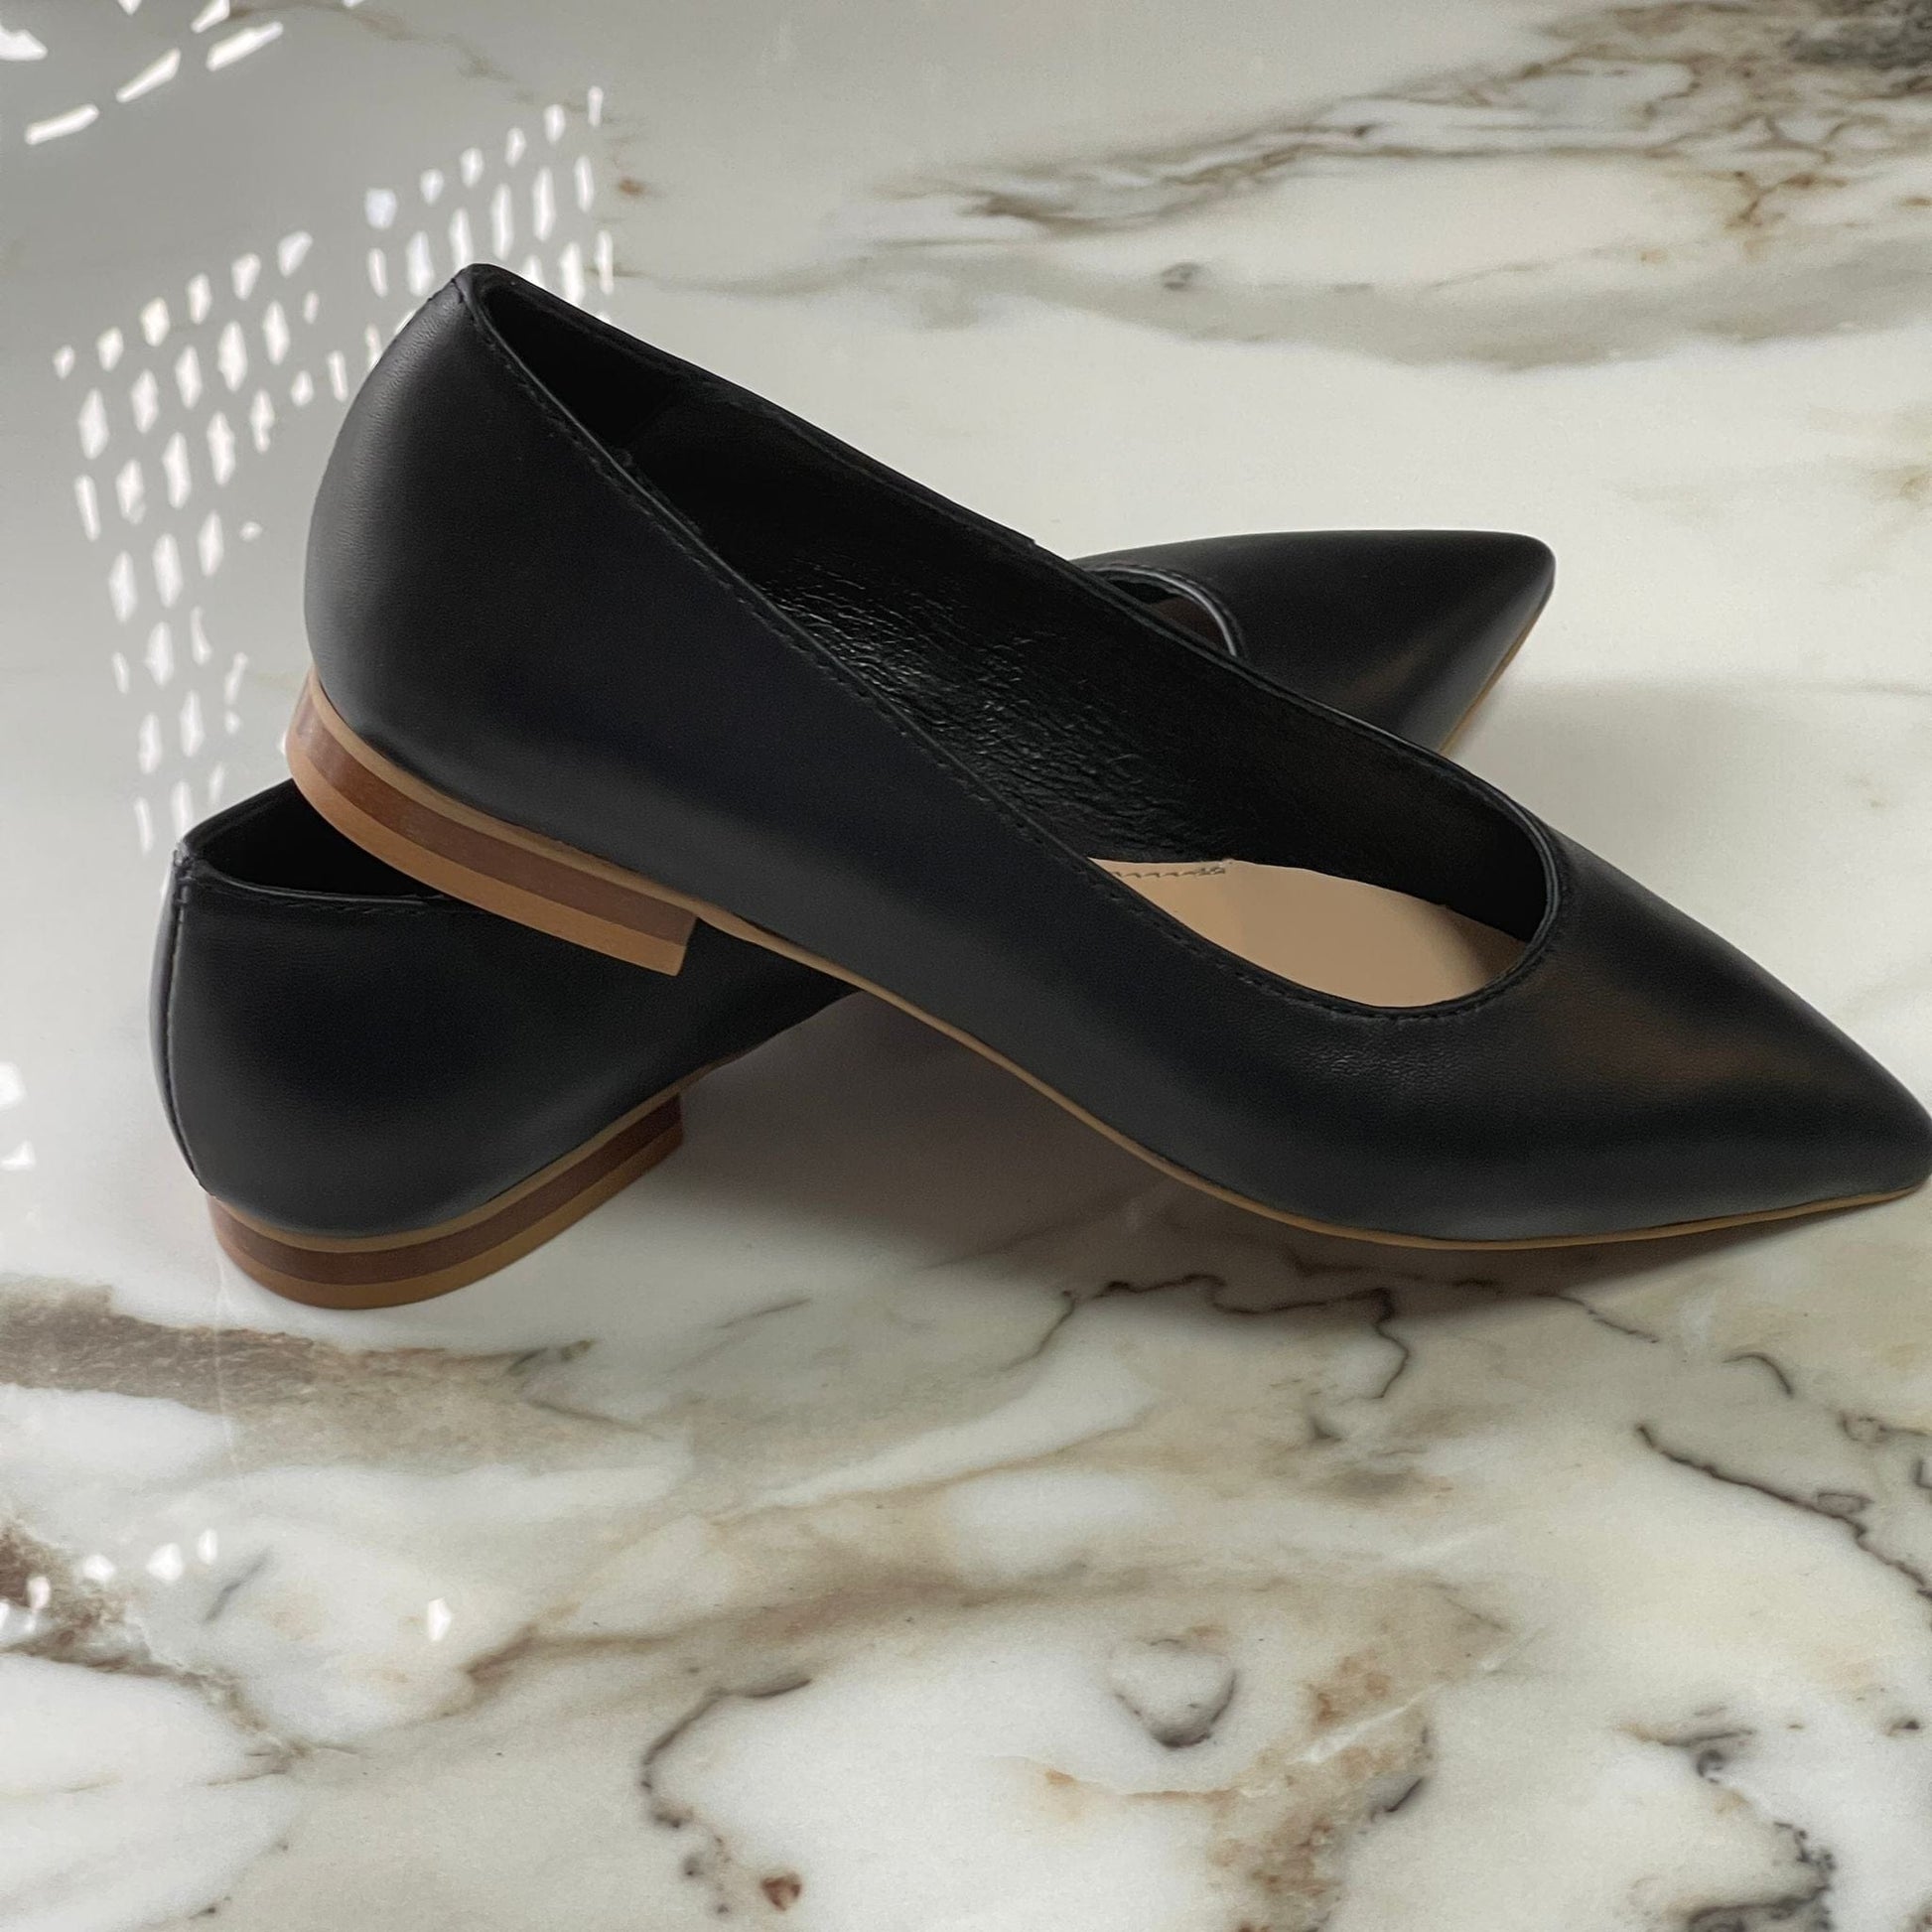 Pointes toe small size ballerina pumps in black leather